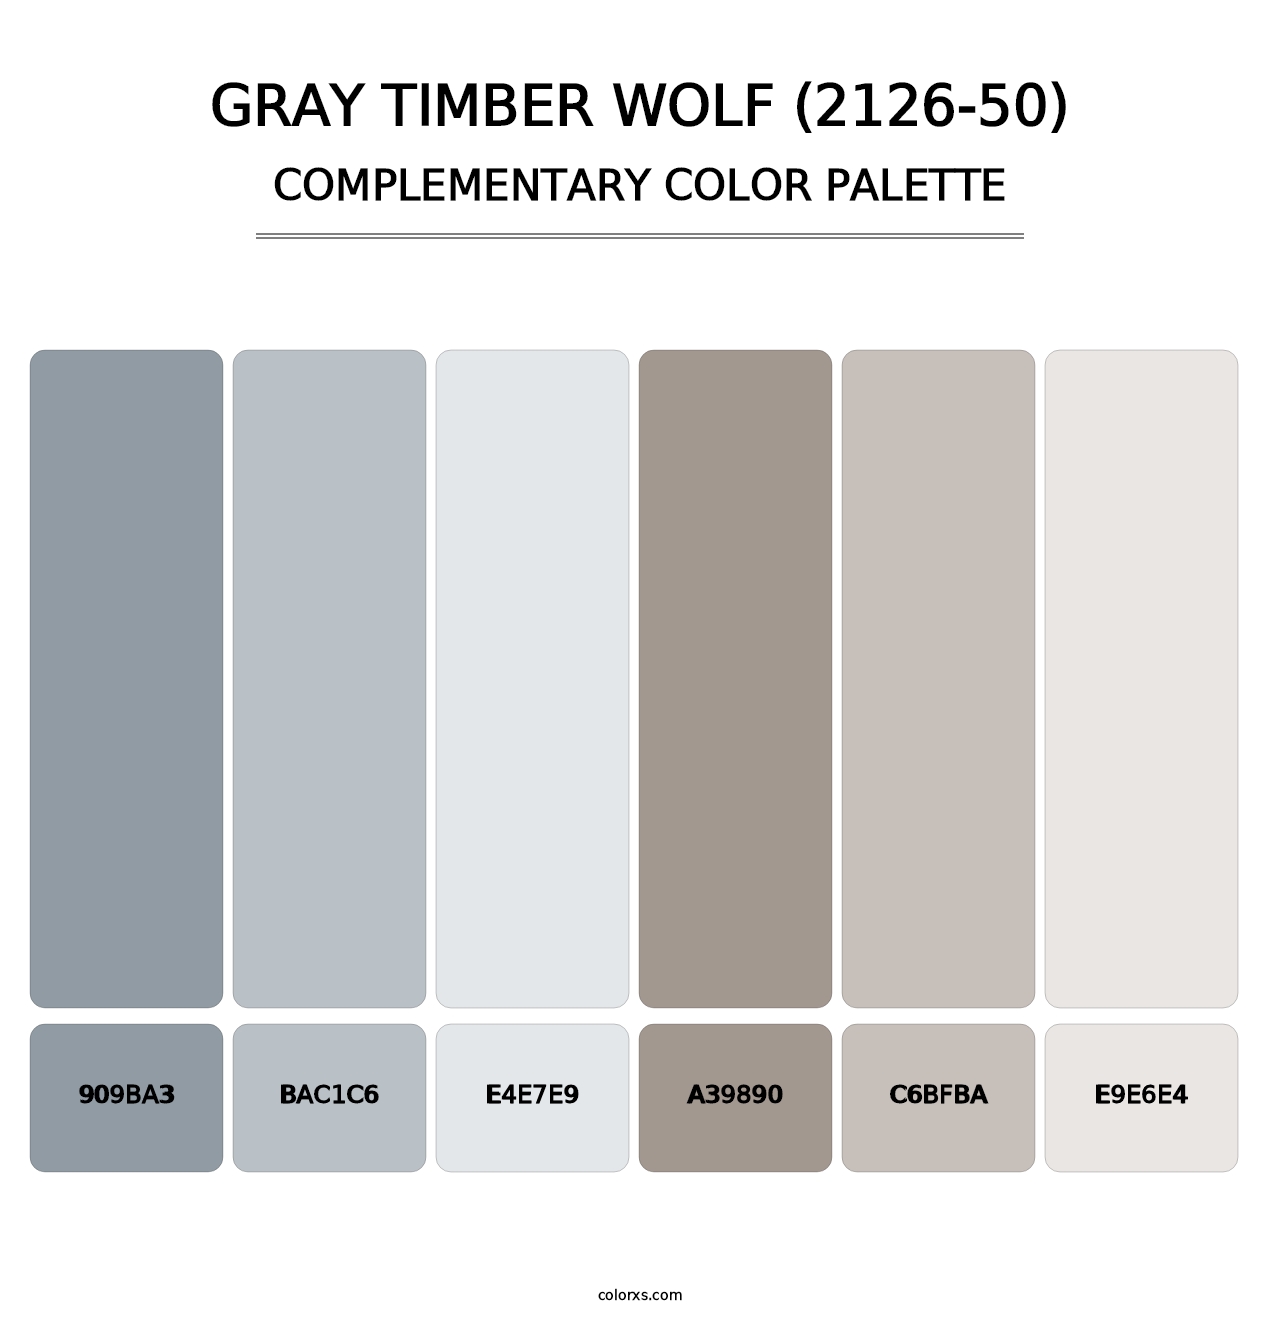 Gray Timber Wolf (2126-50) - Complementary Color Palette